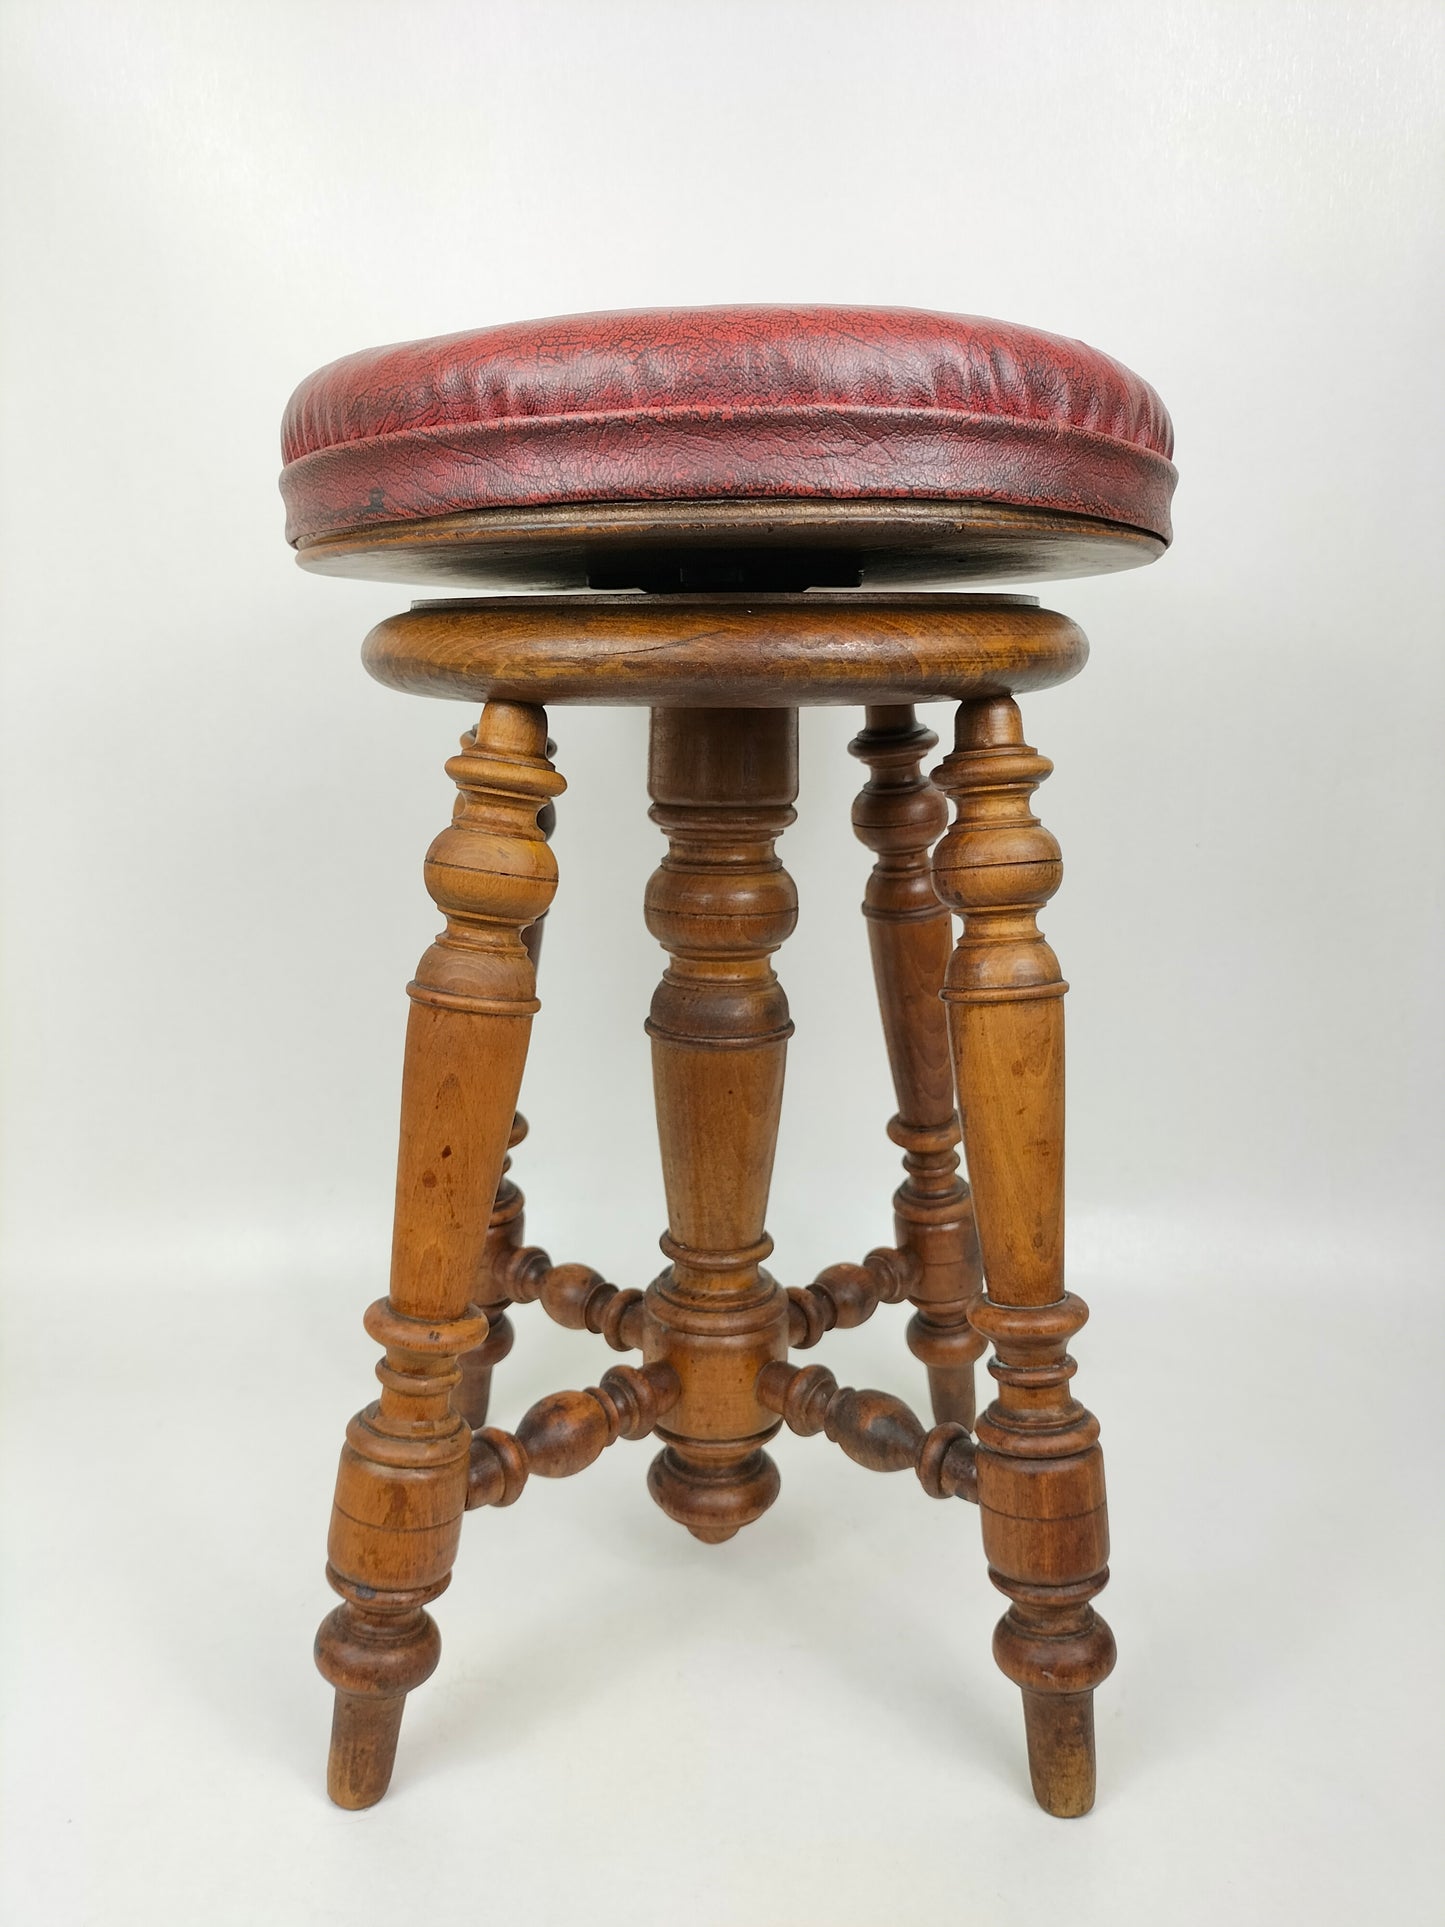 Vintage wooden adjustable piano stool with leather seat // France - 20th century